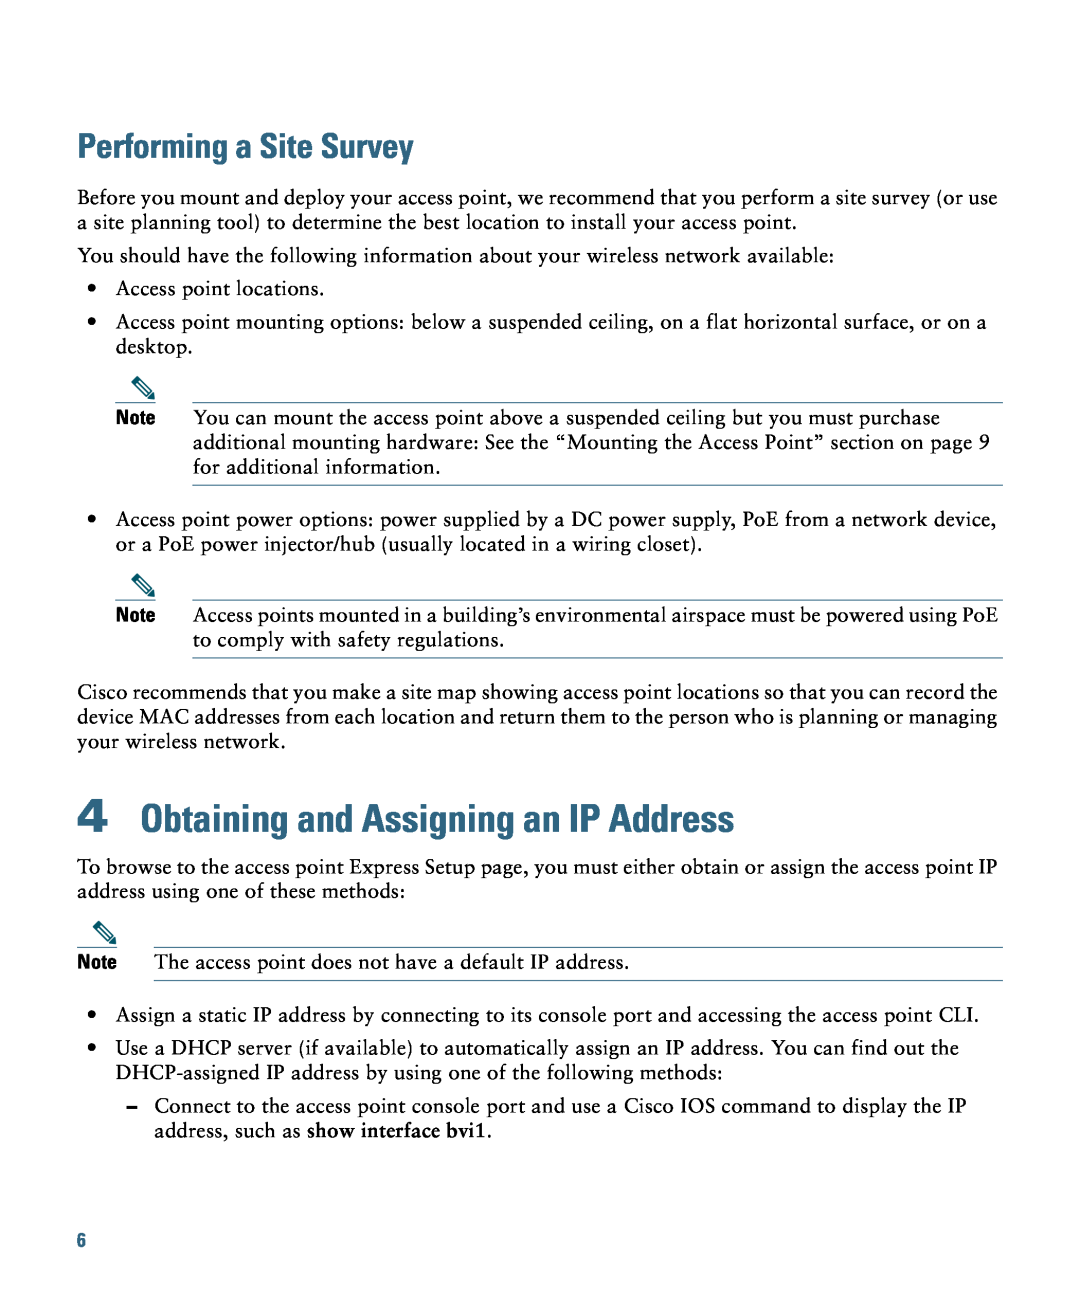 Cisco Systems 1140 specifications Obtaining and Assigning an IP Address, Performing a Site Survey 